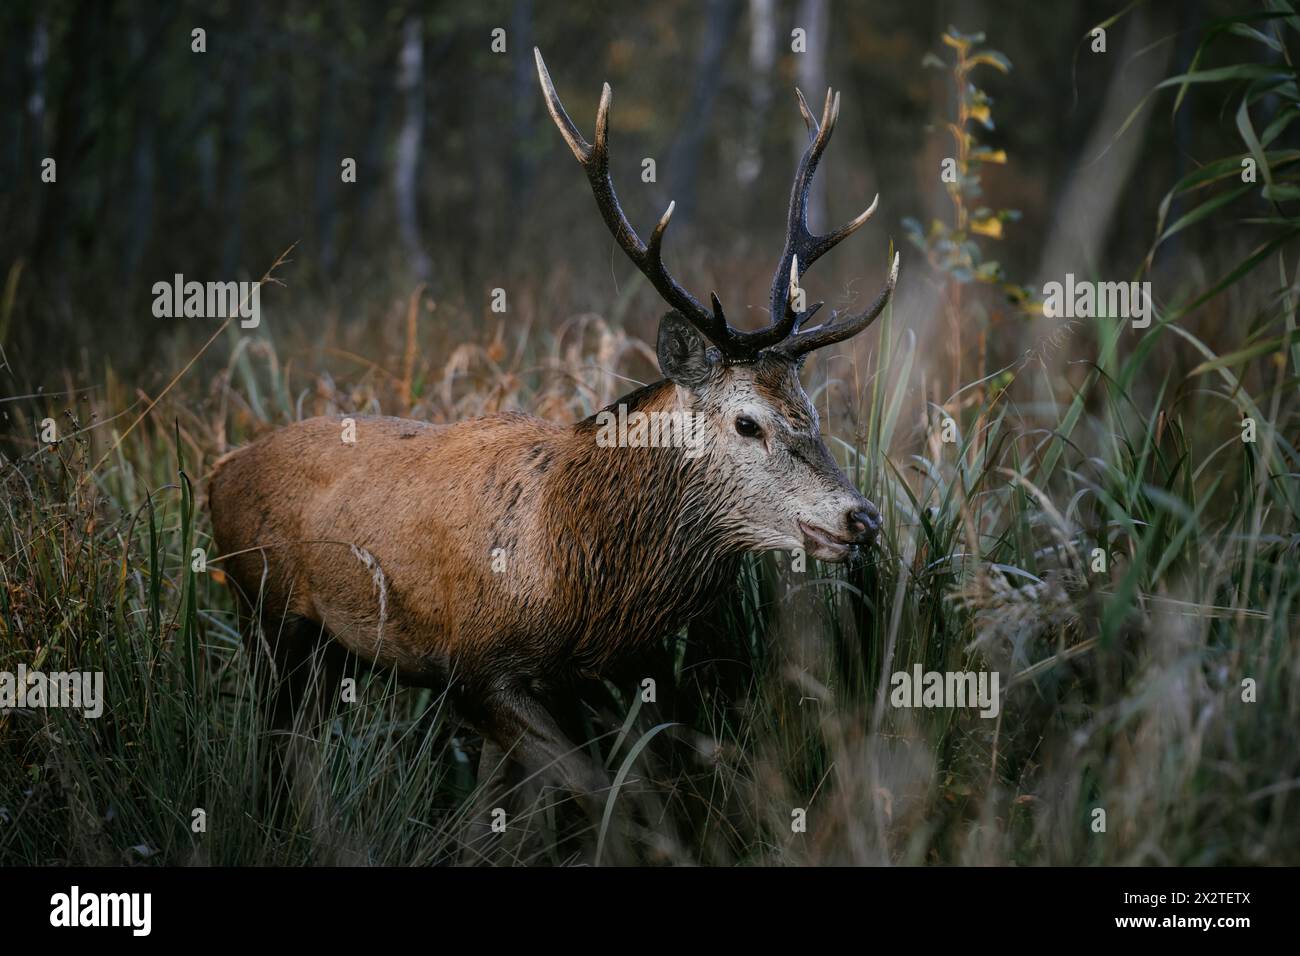 Red deer (Cervus elaphus) in the tall grass. Subcarpathian. Poland Stock Photo